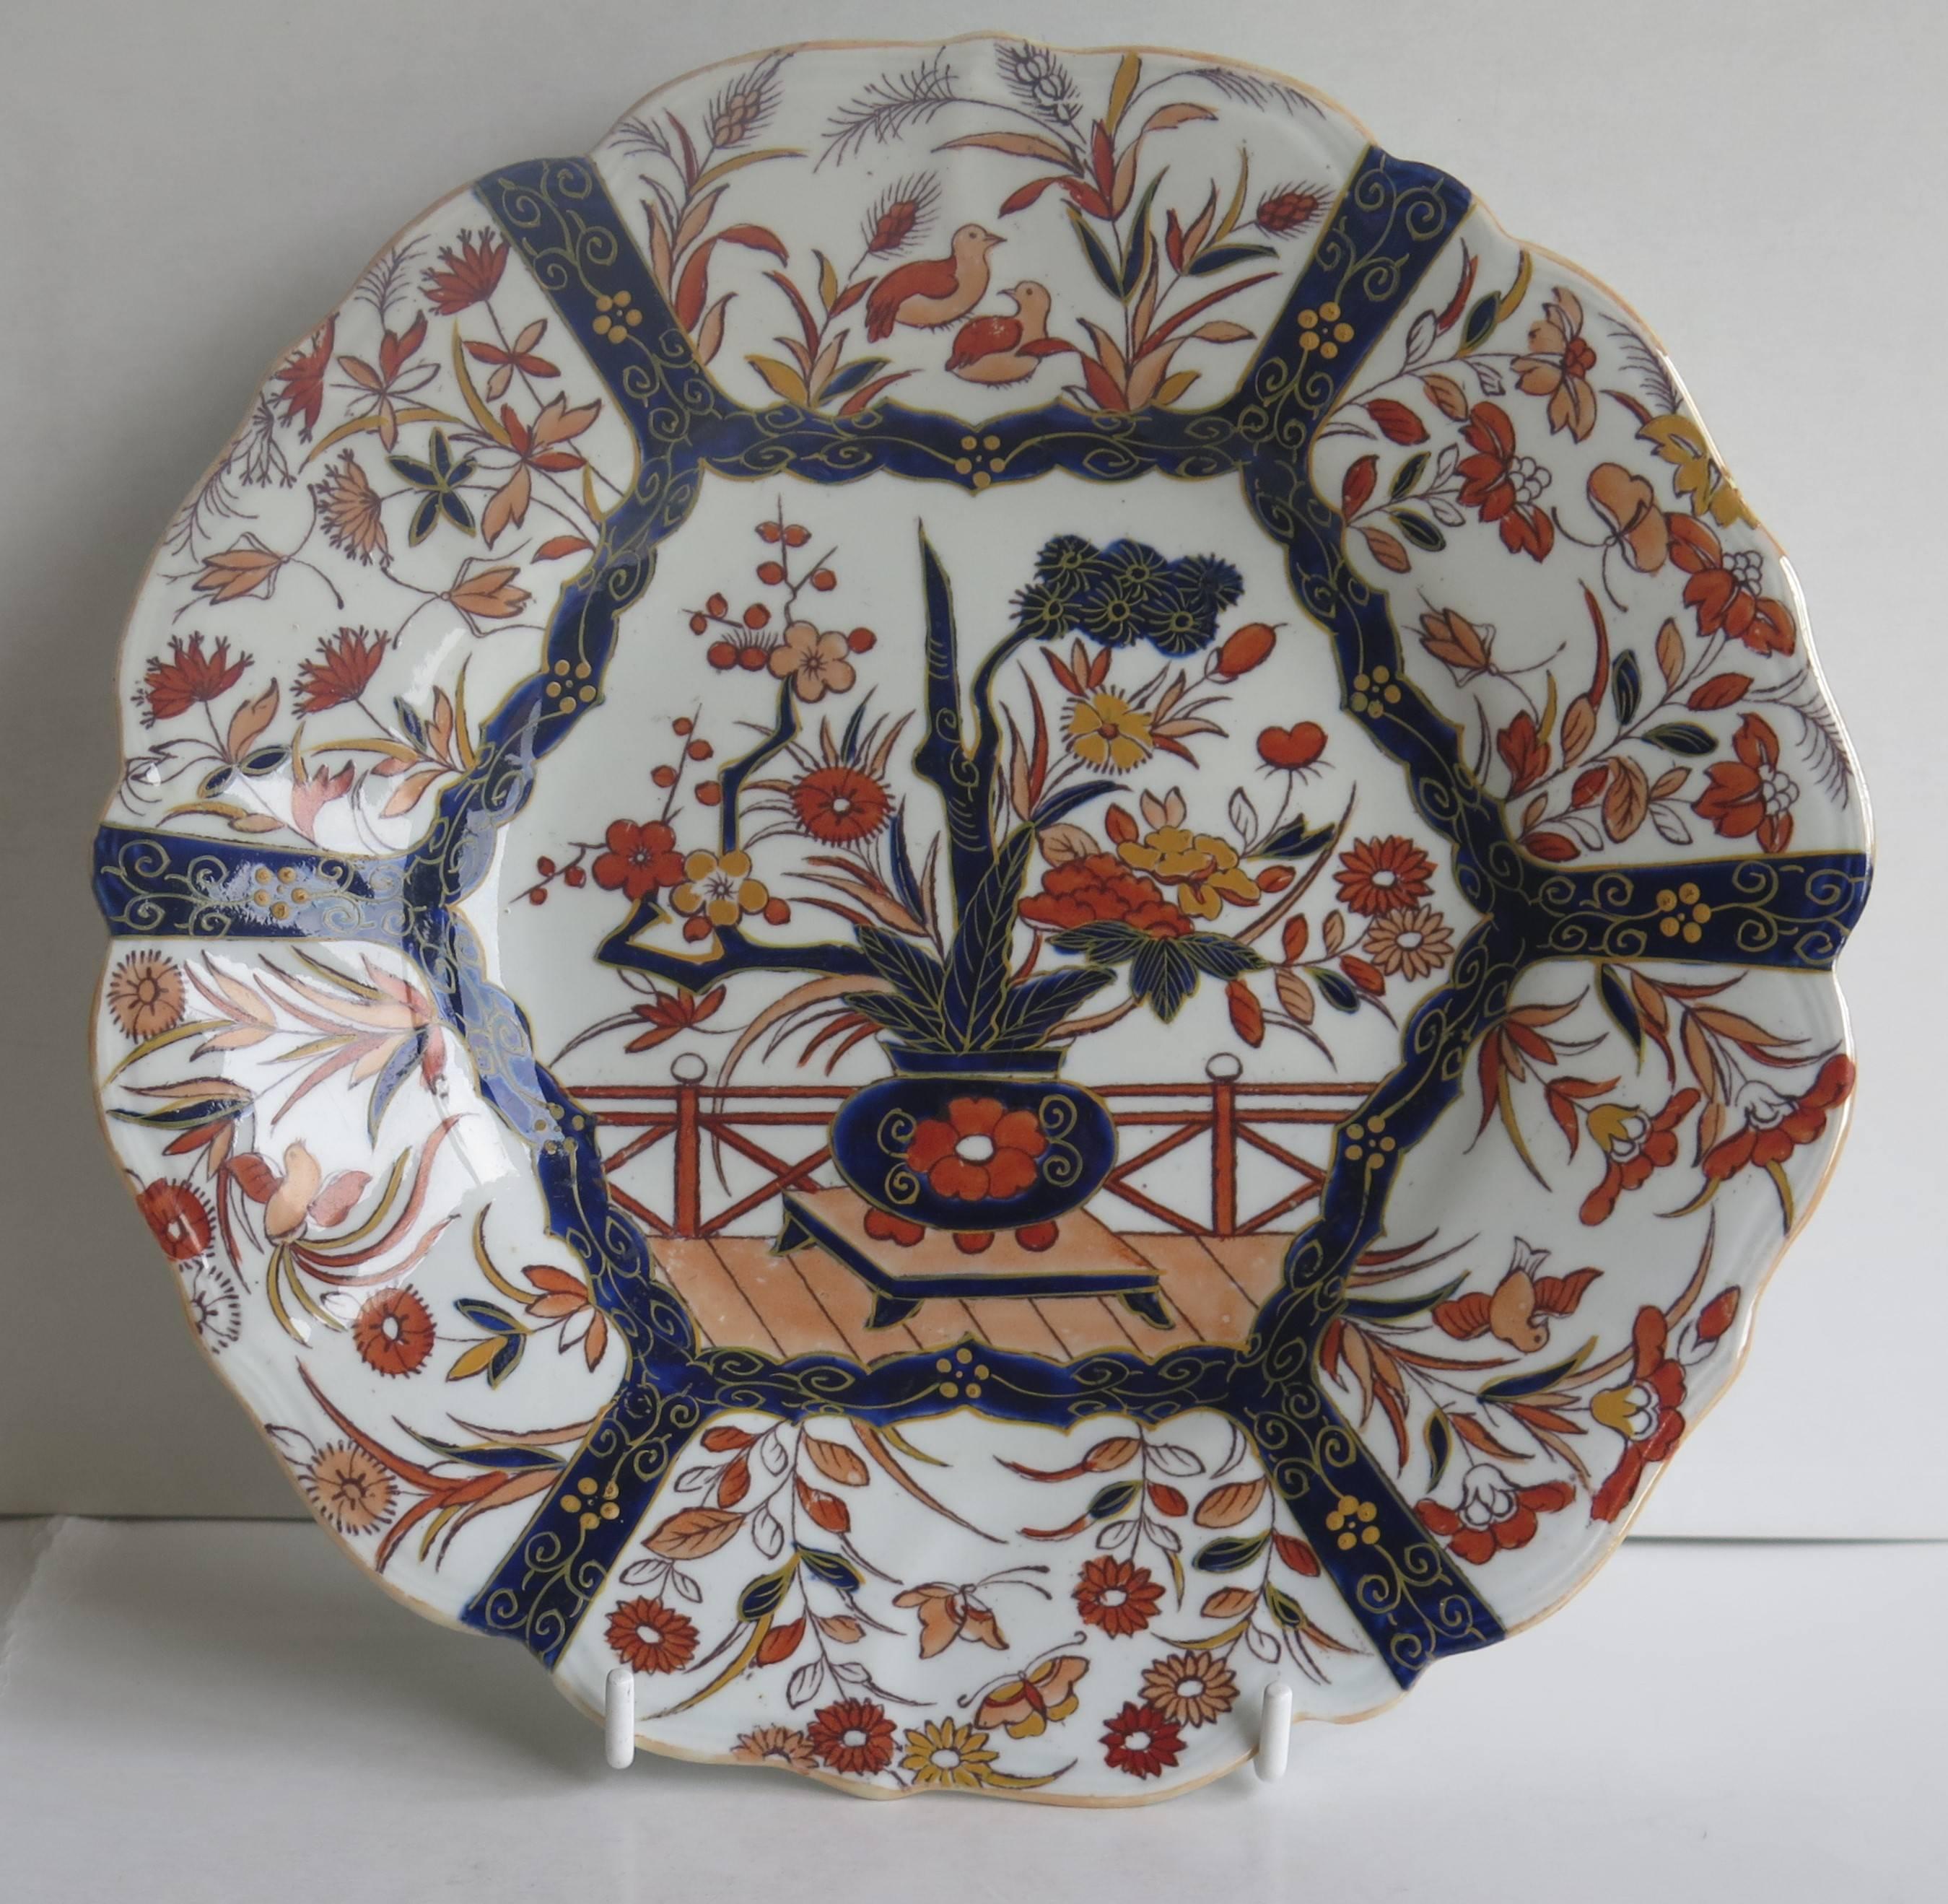 Chinoiserie Mason's Ironstone Desert Plate Fence and Bowl Pattern Hand-Painted, circa 1825